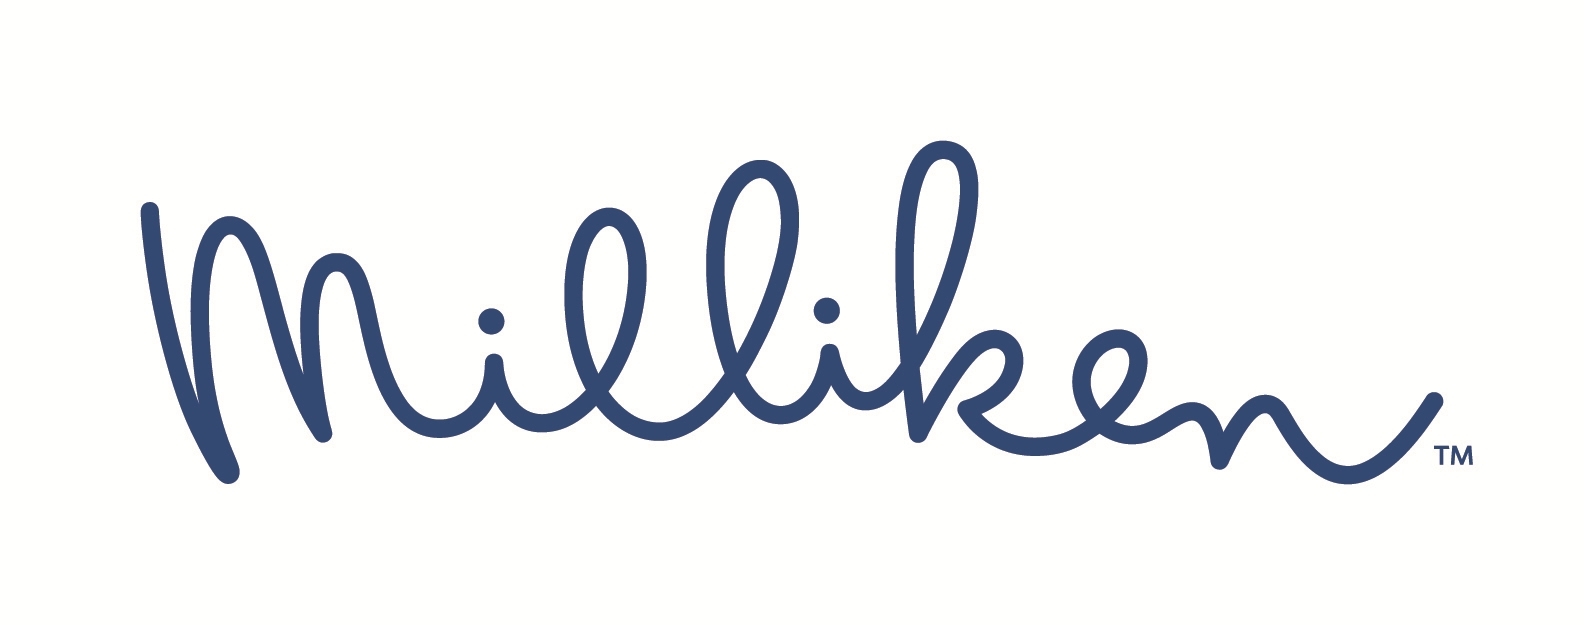 milliken & company makes forbes best employers for diversity list | business wire